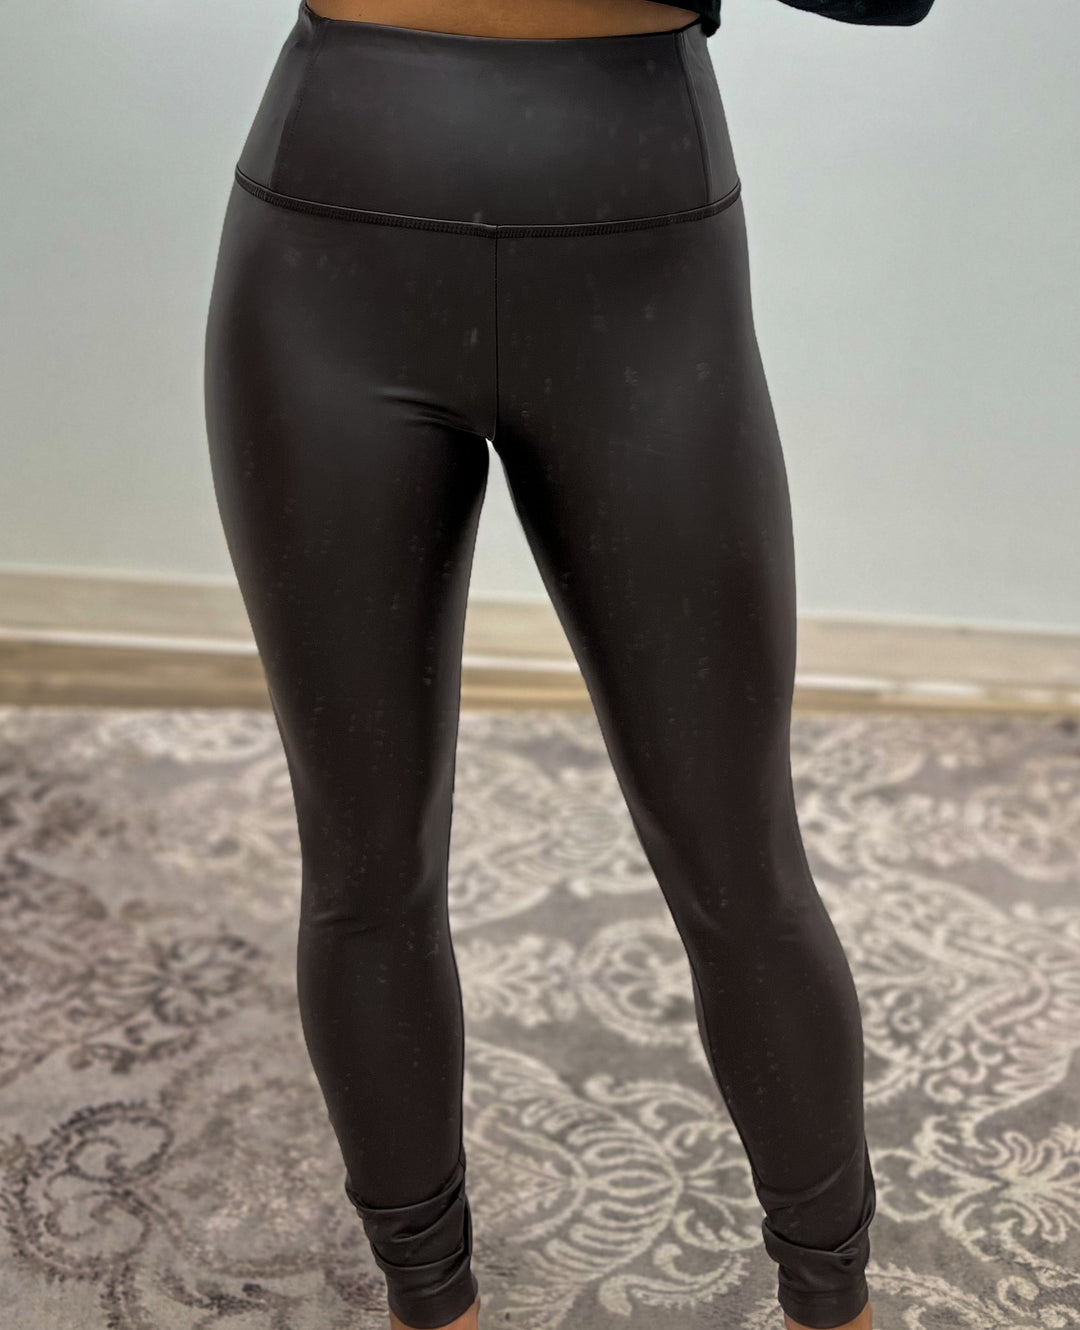 Riley BLACK High Waist Faux Leather Leggings – Get That Trend